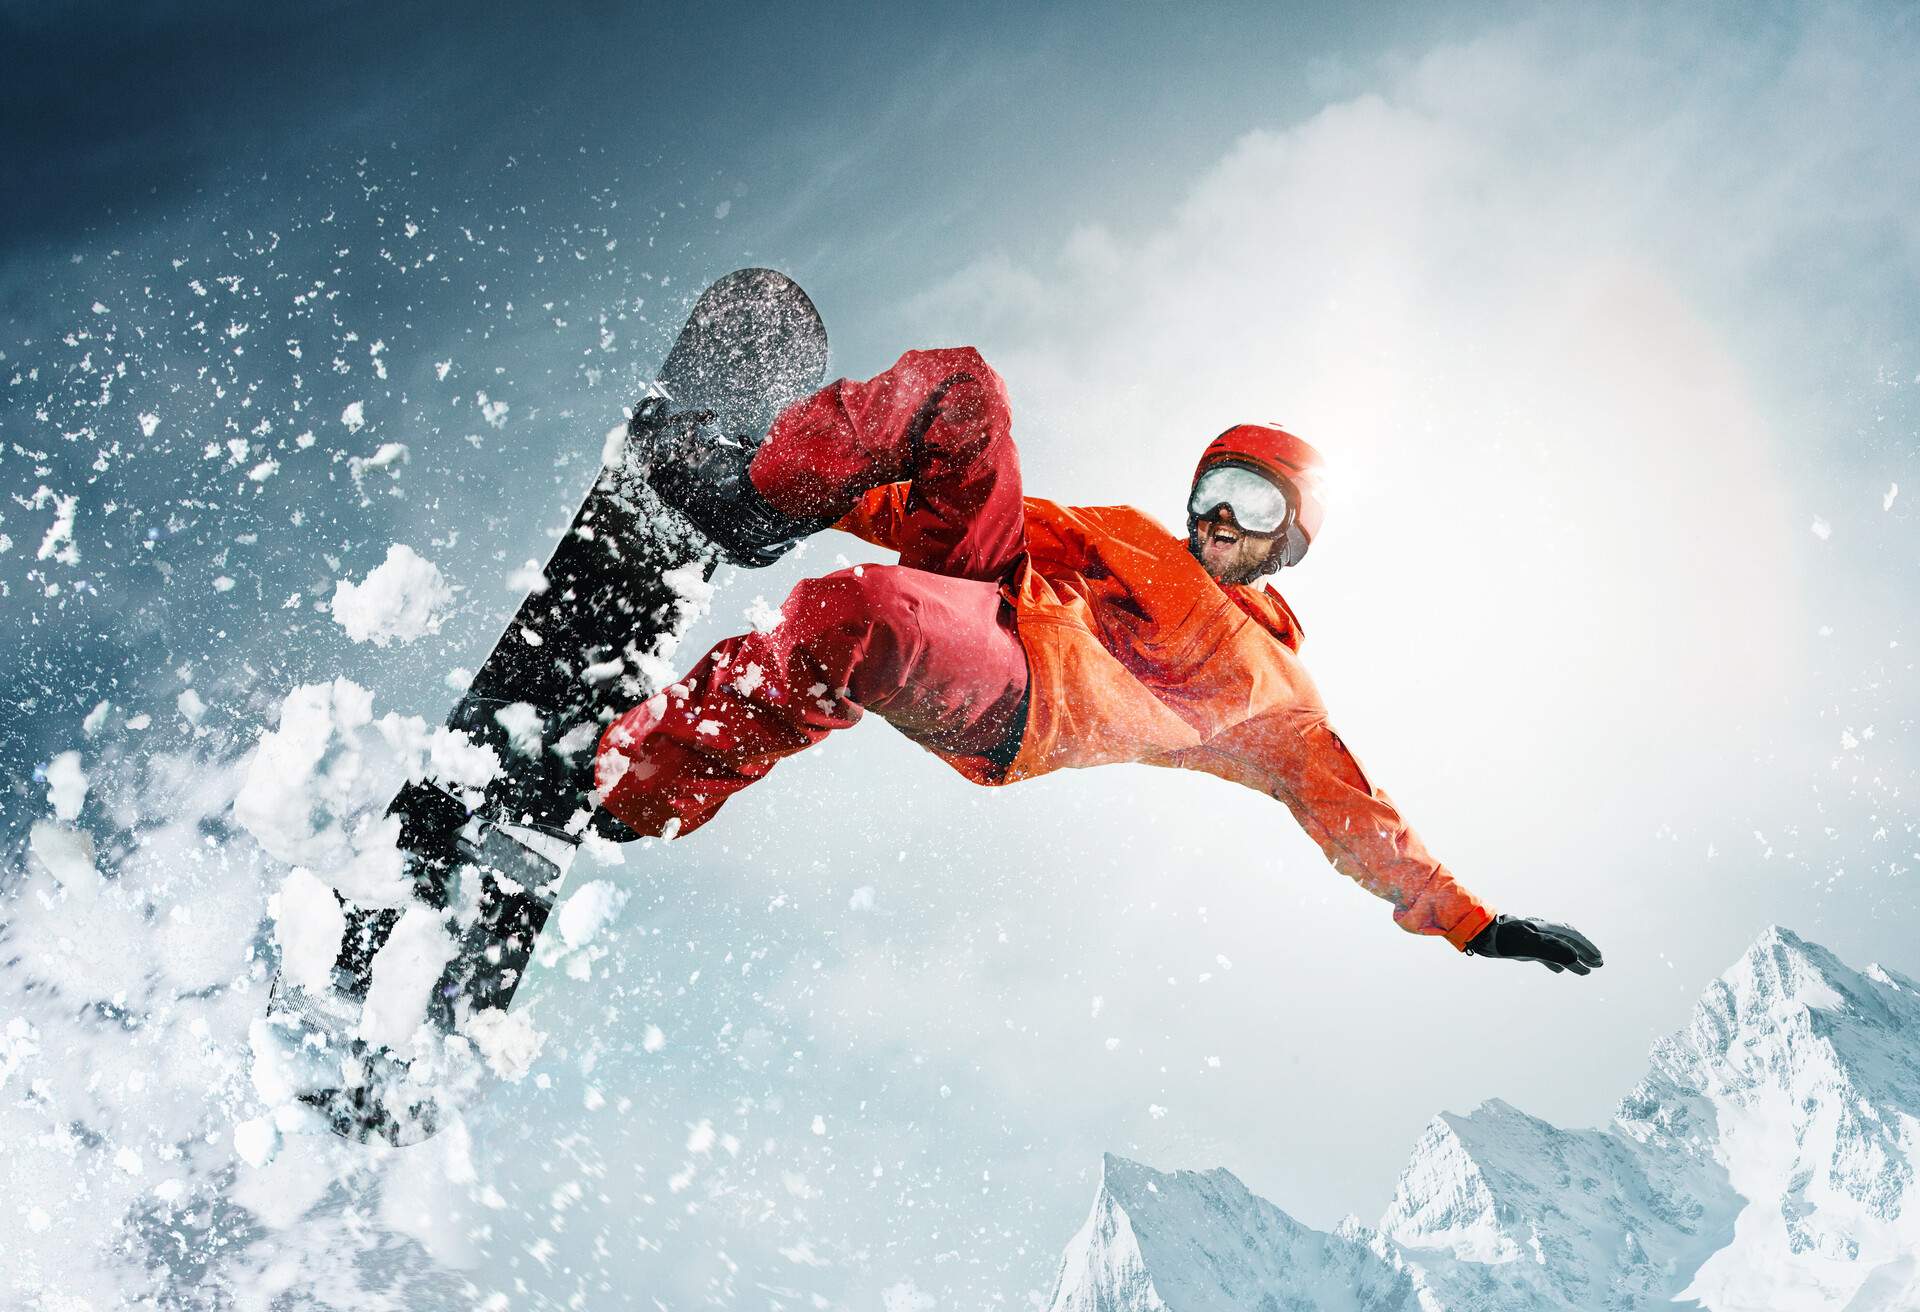 A snowboarder jumping over powder snow and a view of the snowy mountains.